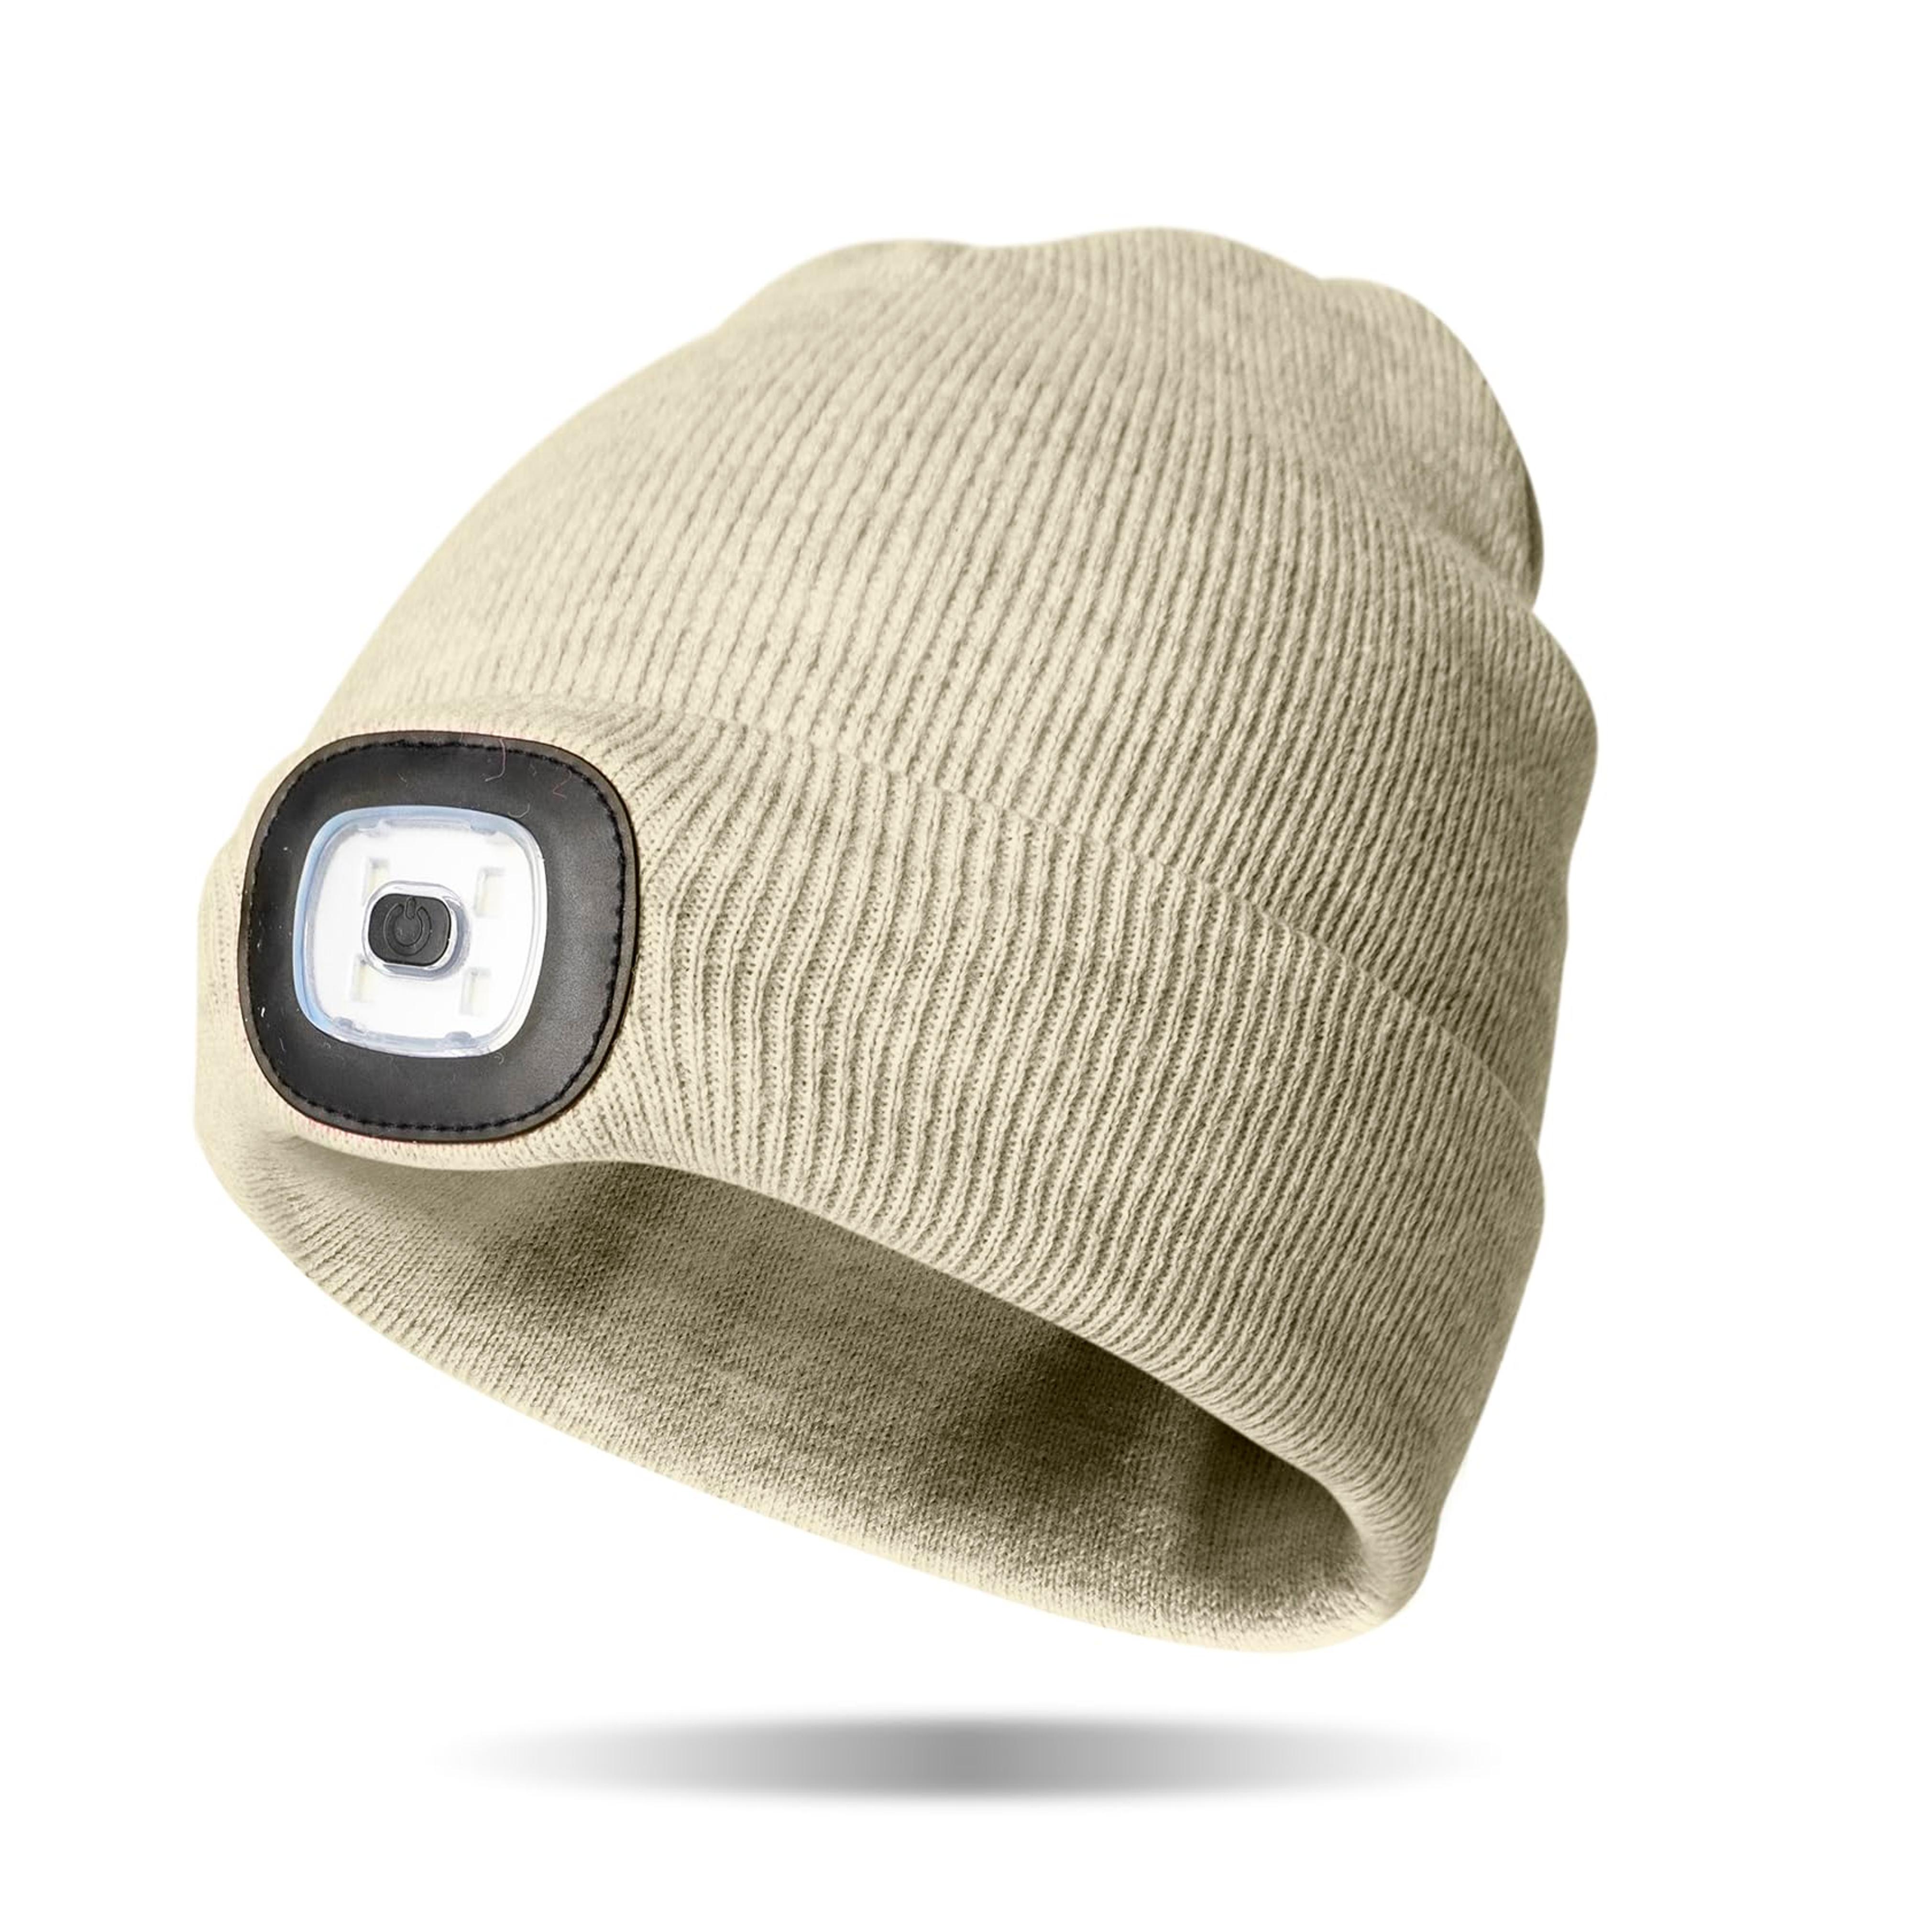 Amazon.com: Night Scope Rechargeable LED Brightside Collection Warm Knit Beanie Hand-Free Lighted Head Lamp Hat - Oatmeal : Sports & Outdoors